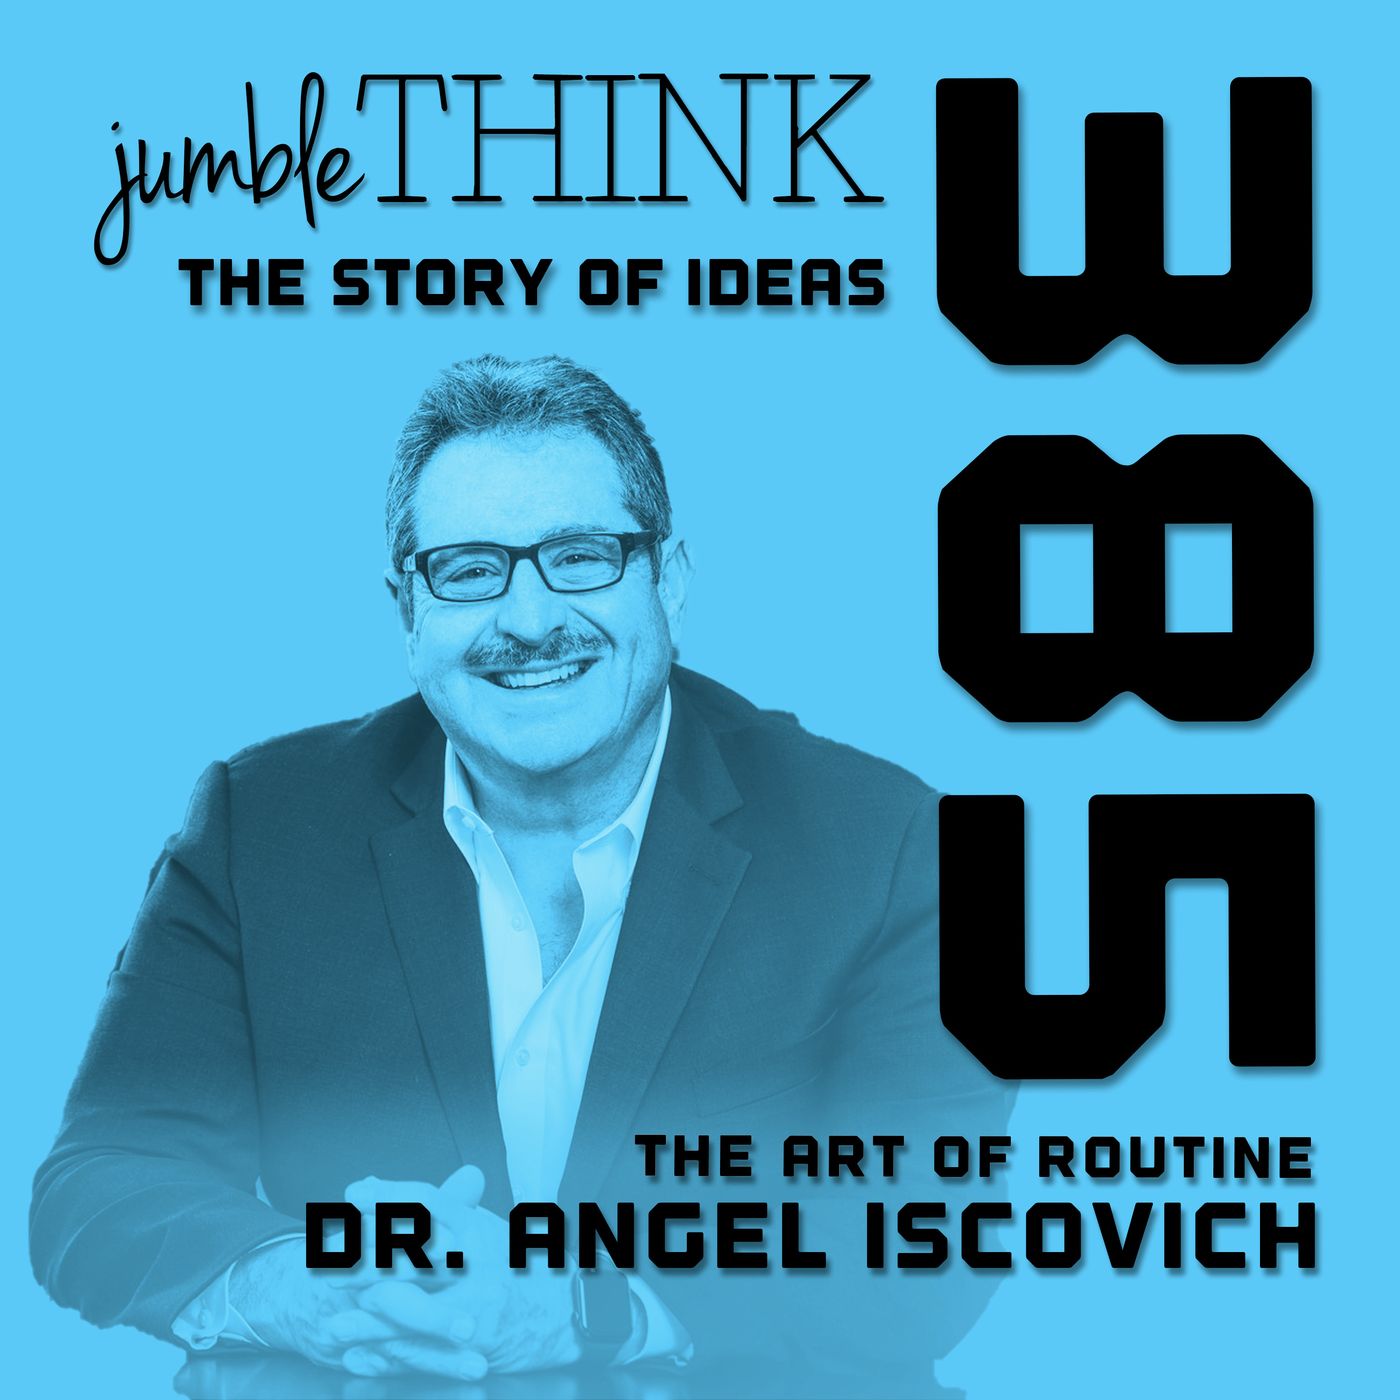 The Art of Routine with Dr. Angel Iscovich